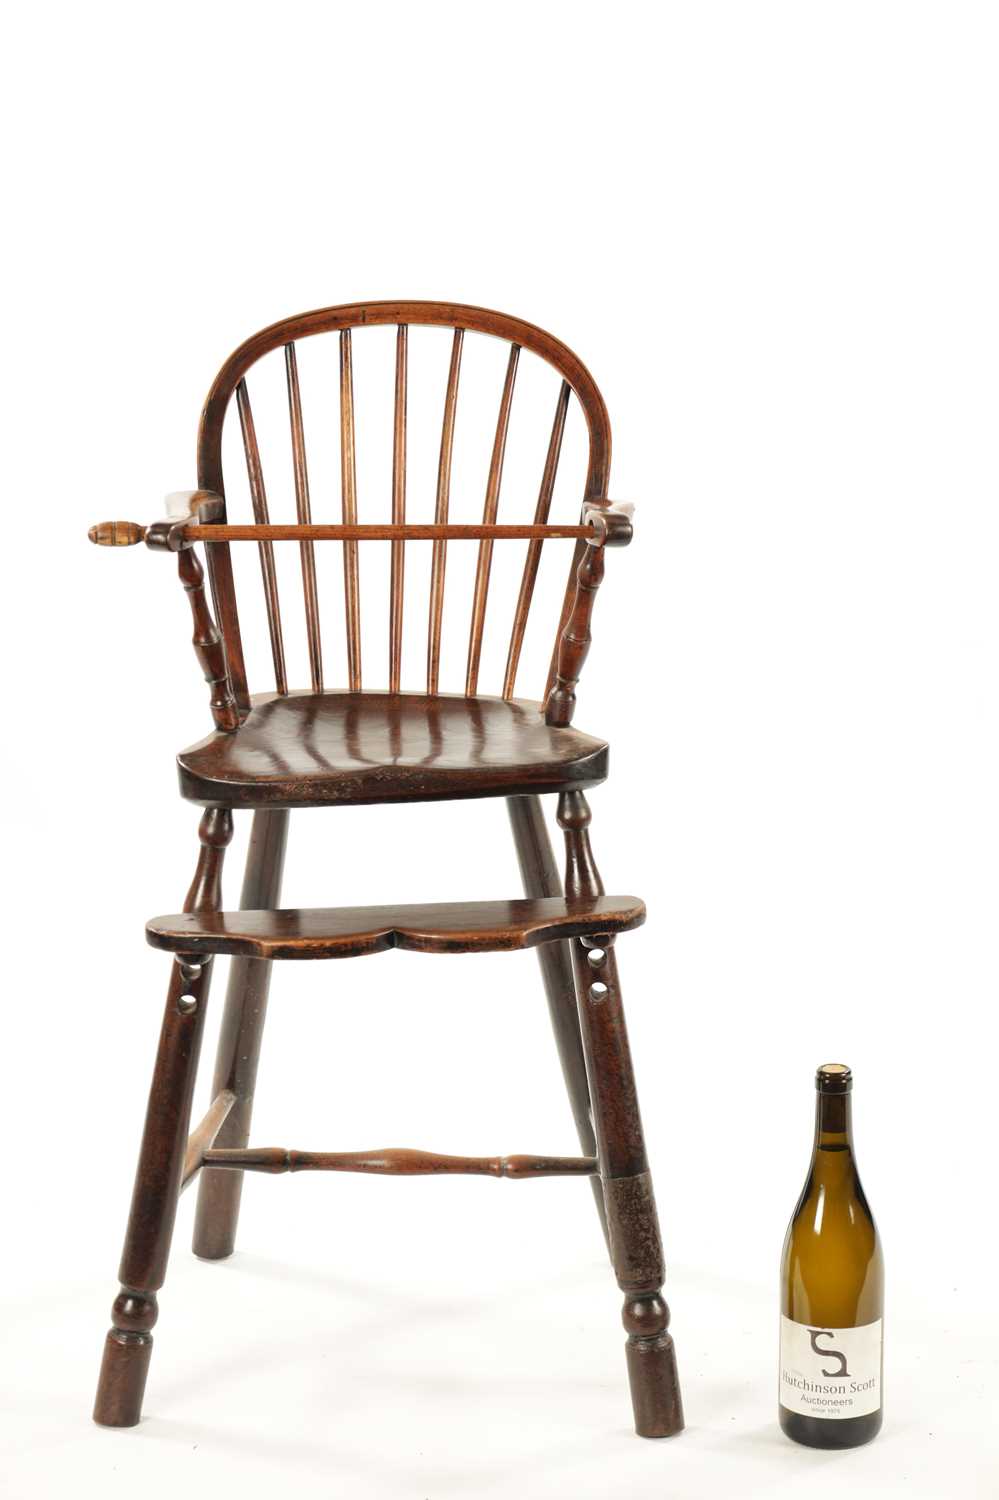 A 19TH CENTURY FRUITWOOD CHILDREN’S SPINDLE BACK HIGH CHAIR - Image 5 of 7